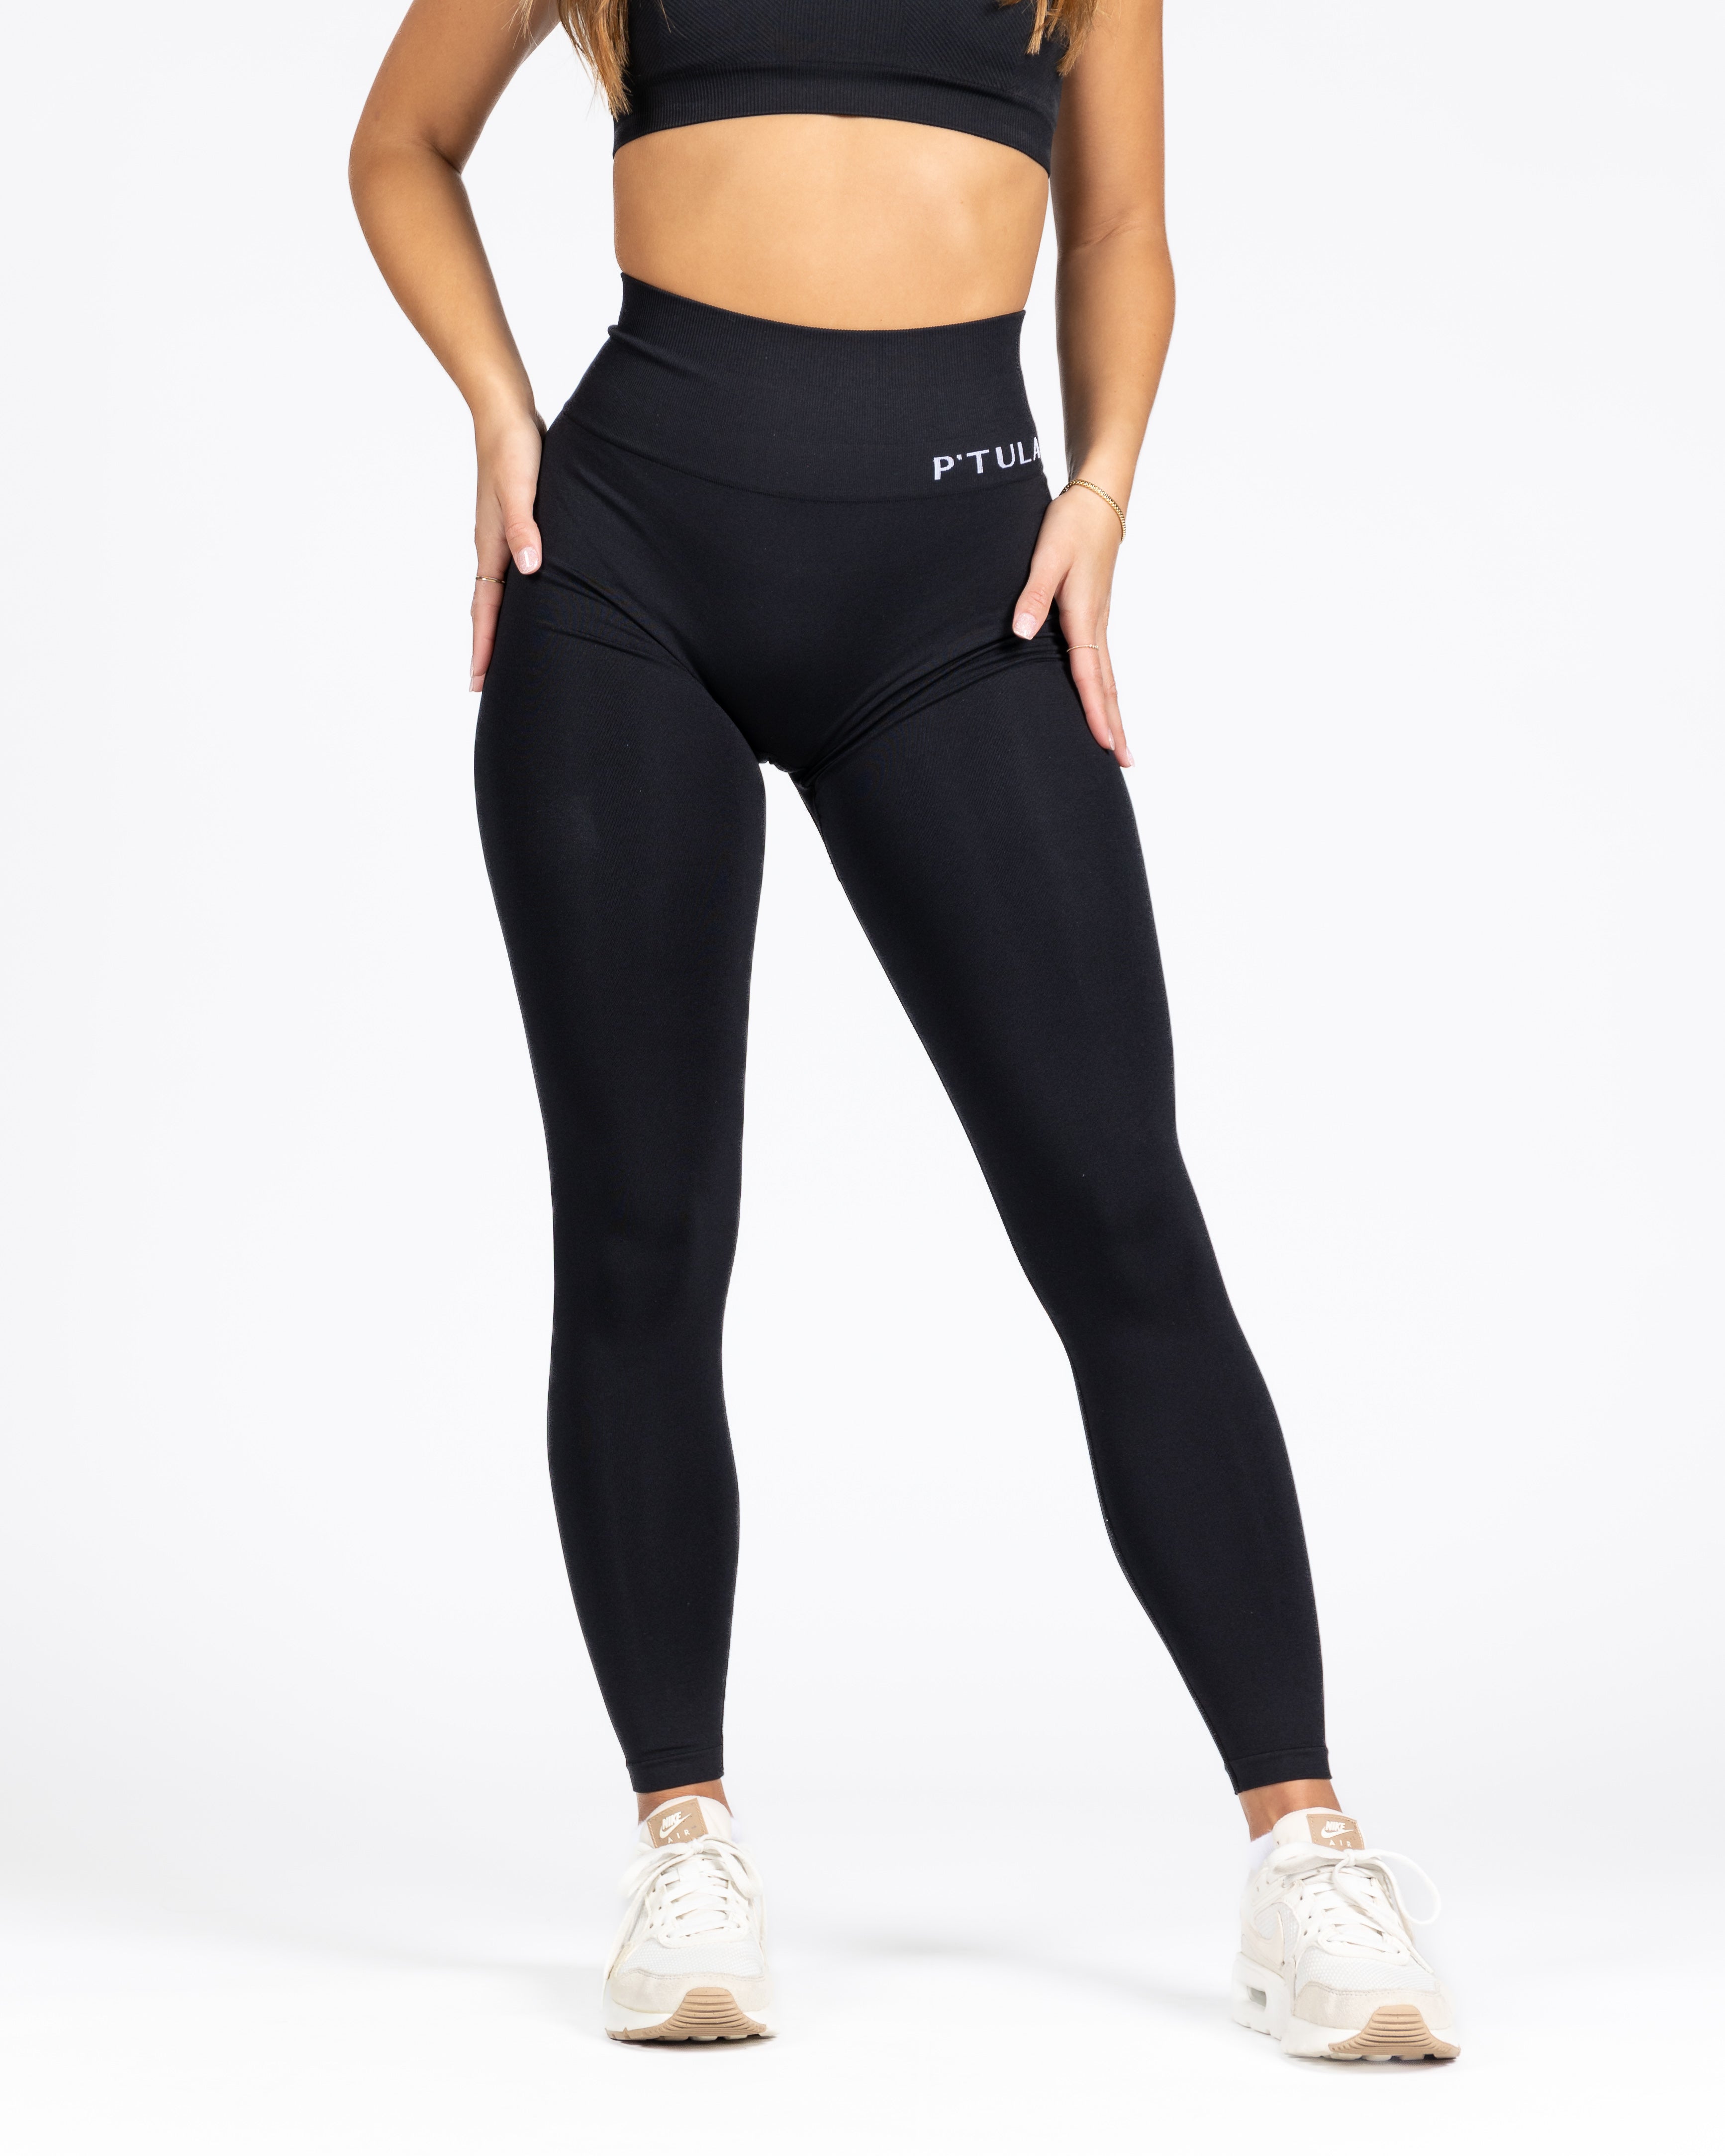 Ptula Active launching September 28th! #activewear #leggings #activew